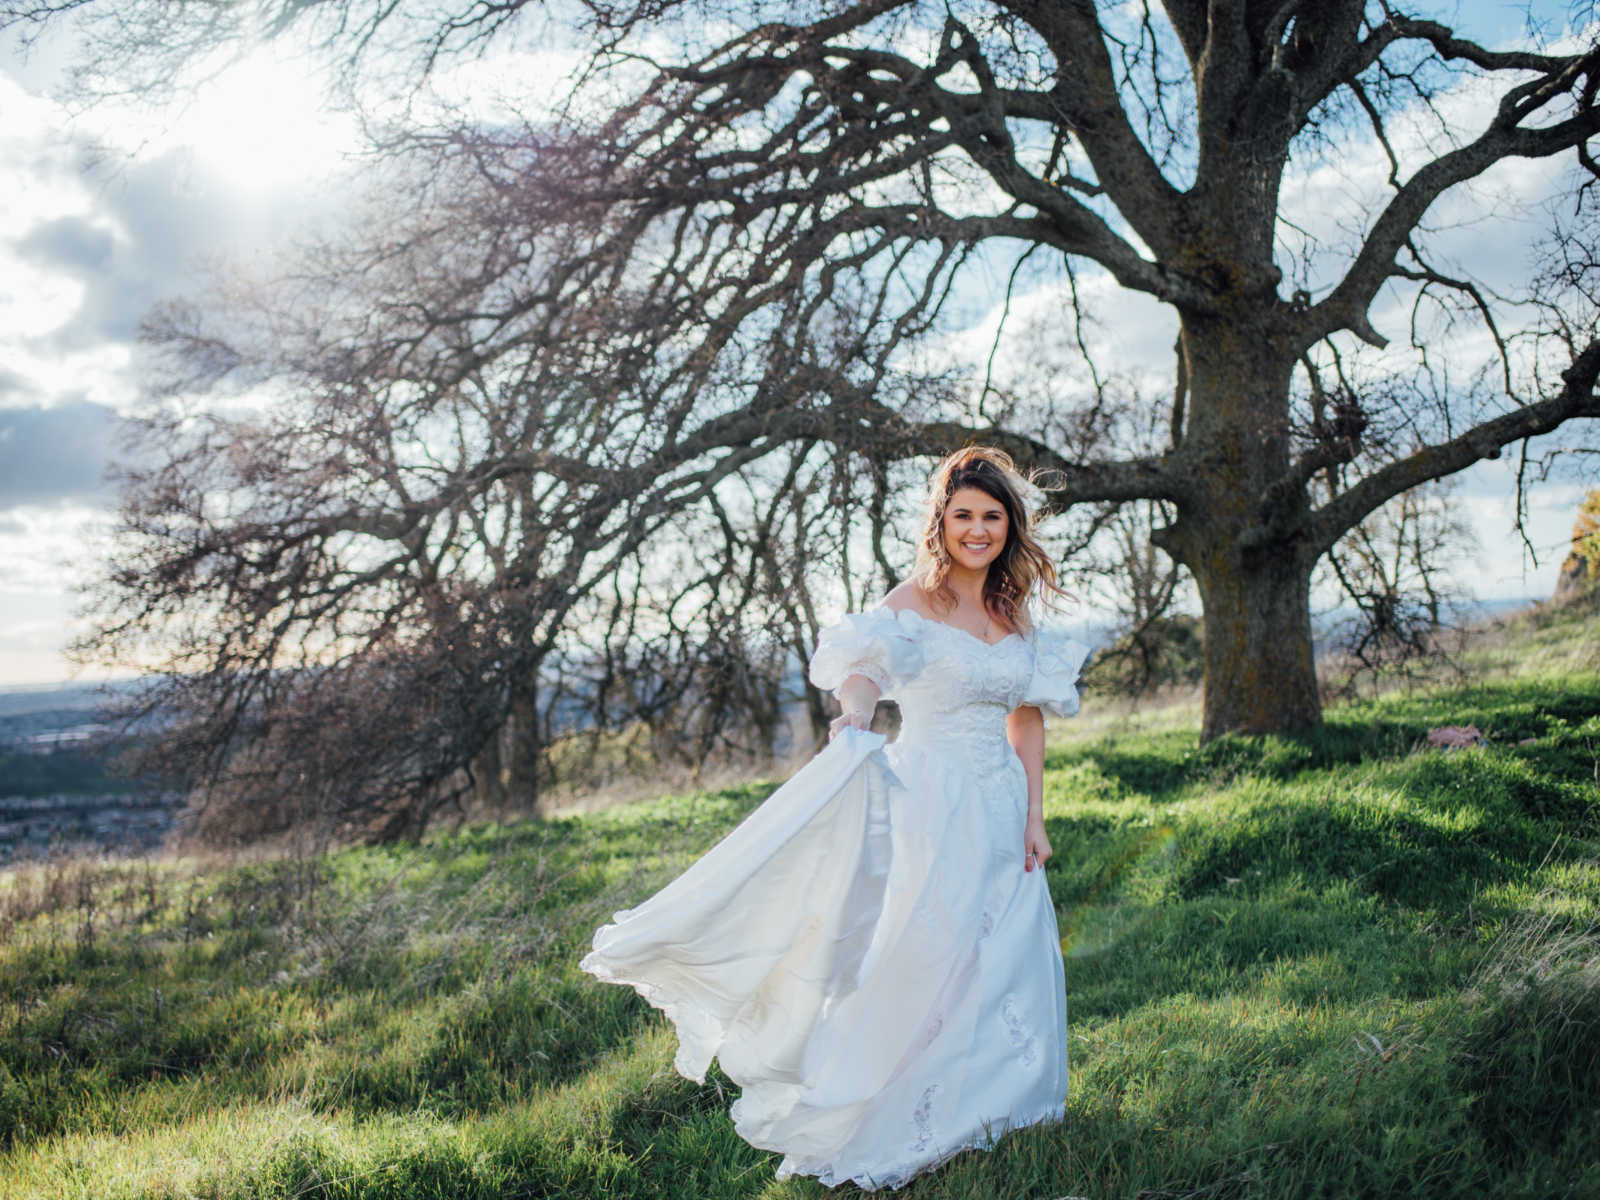 Daughter smiles wearing deceased mothers wedding dress in front of large tree